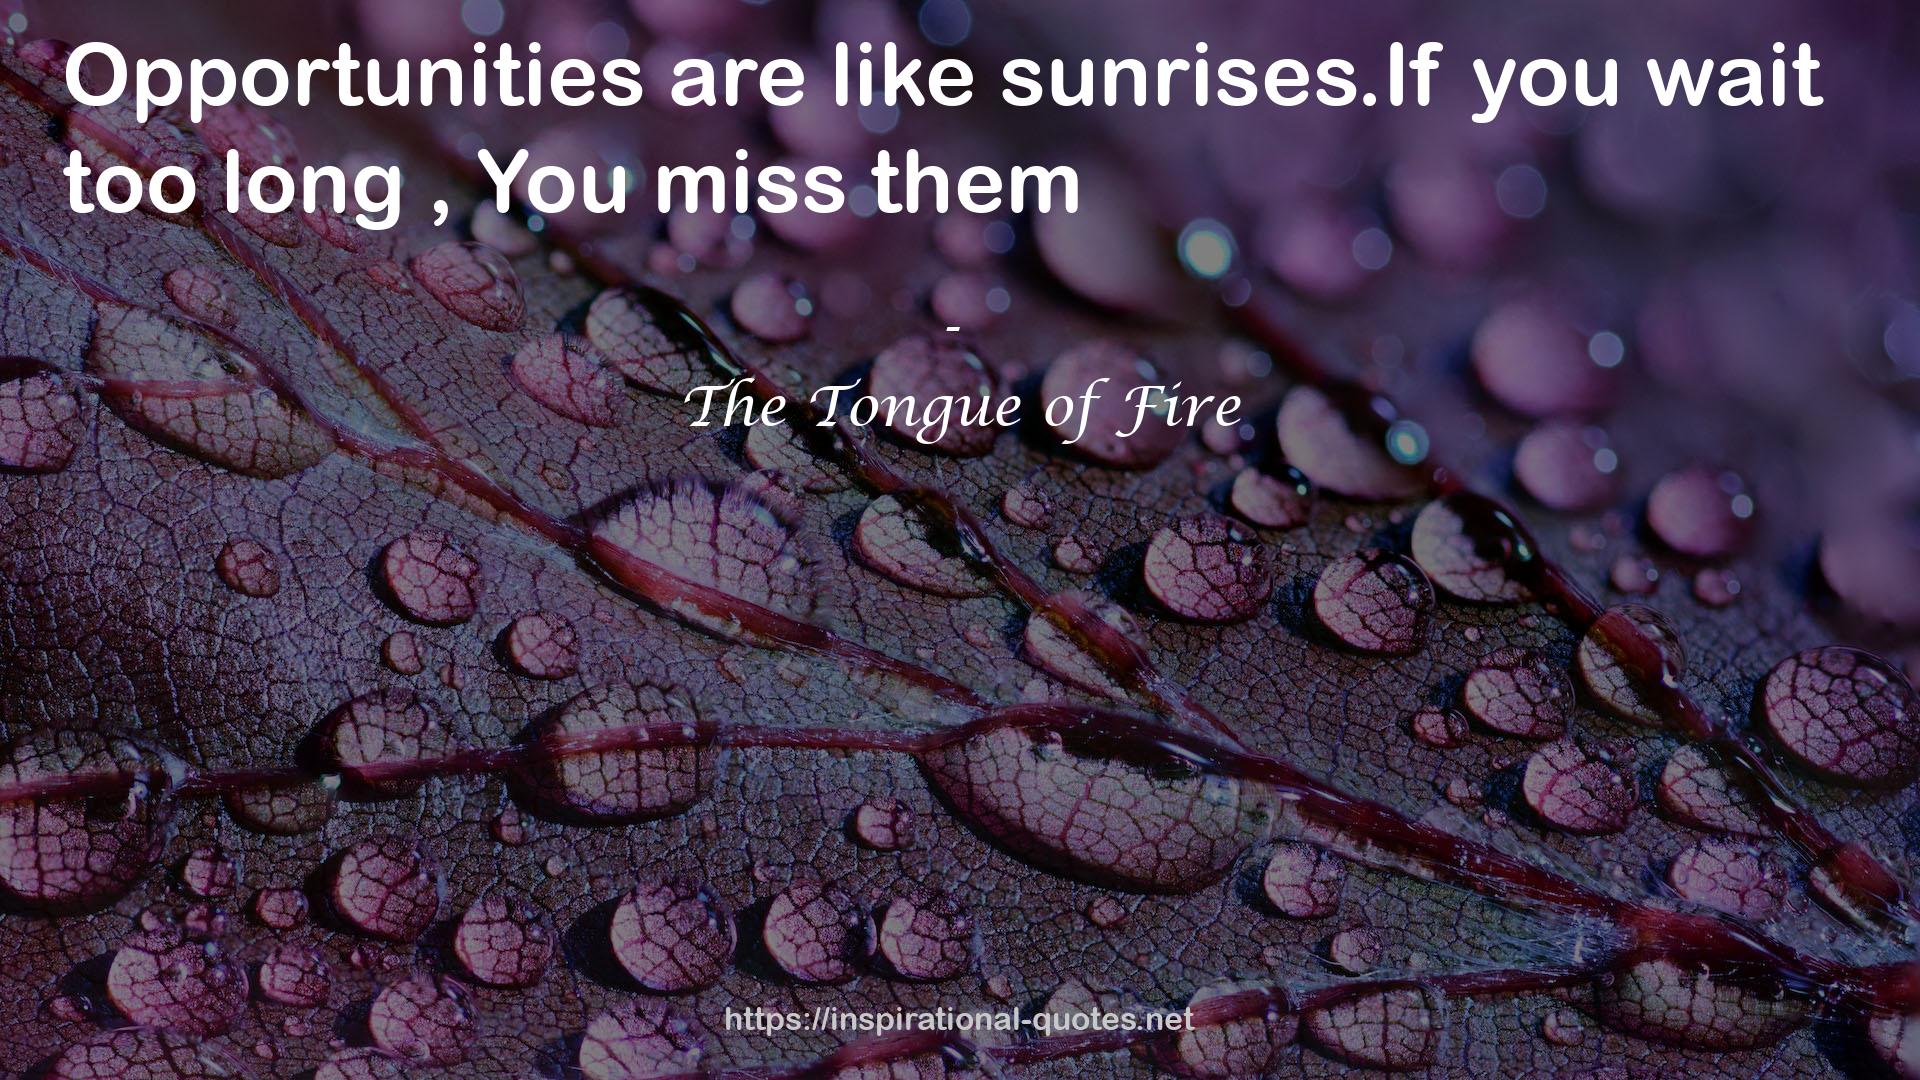 The Tongue of Fire QUOTES